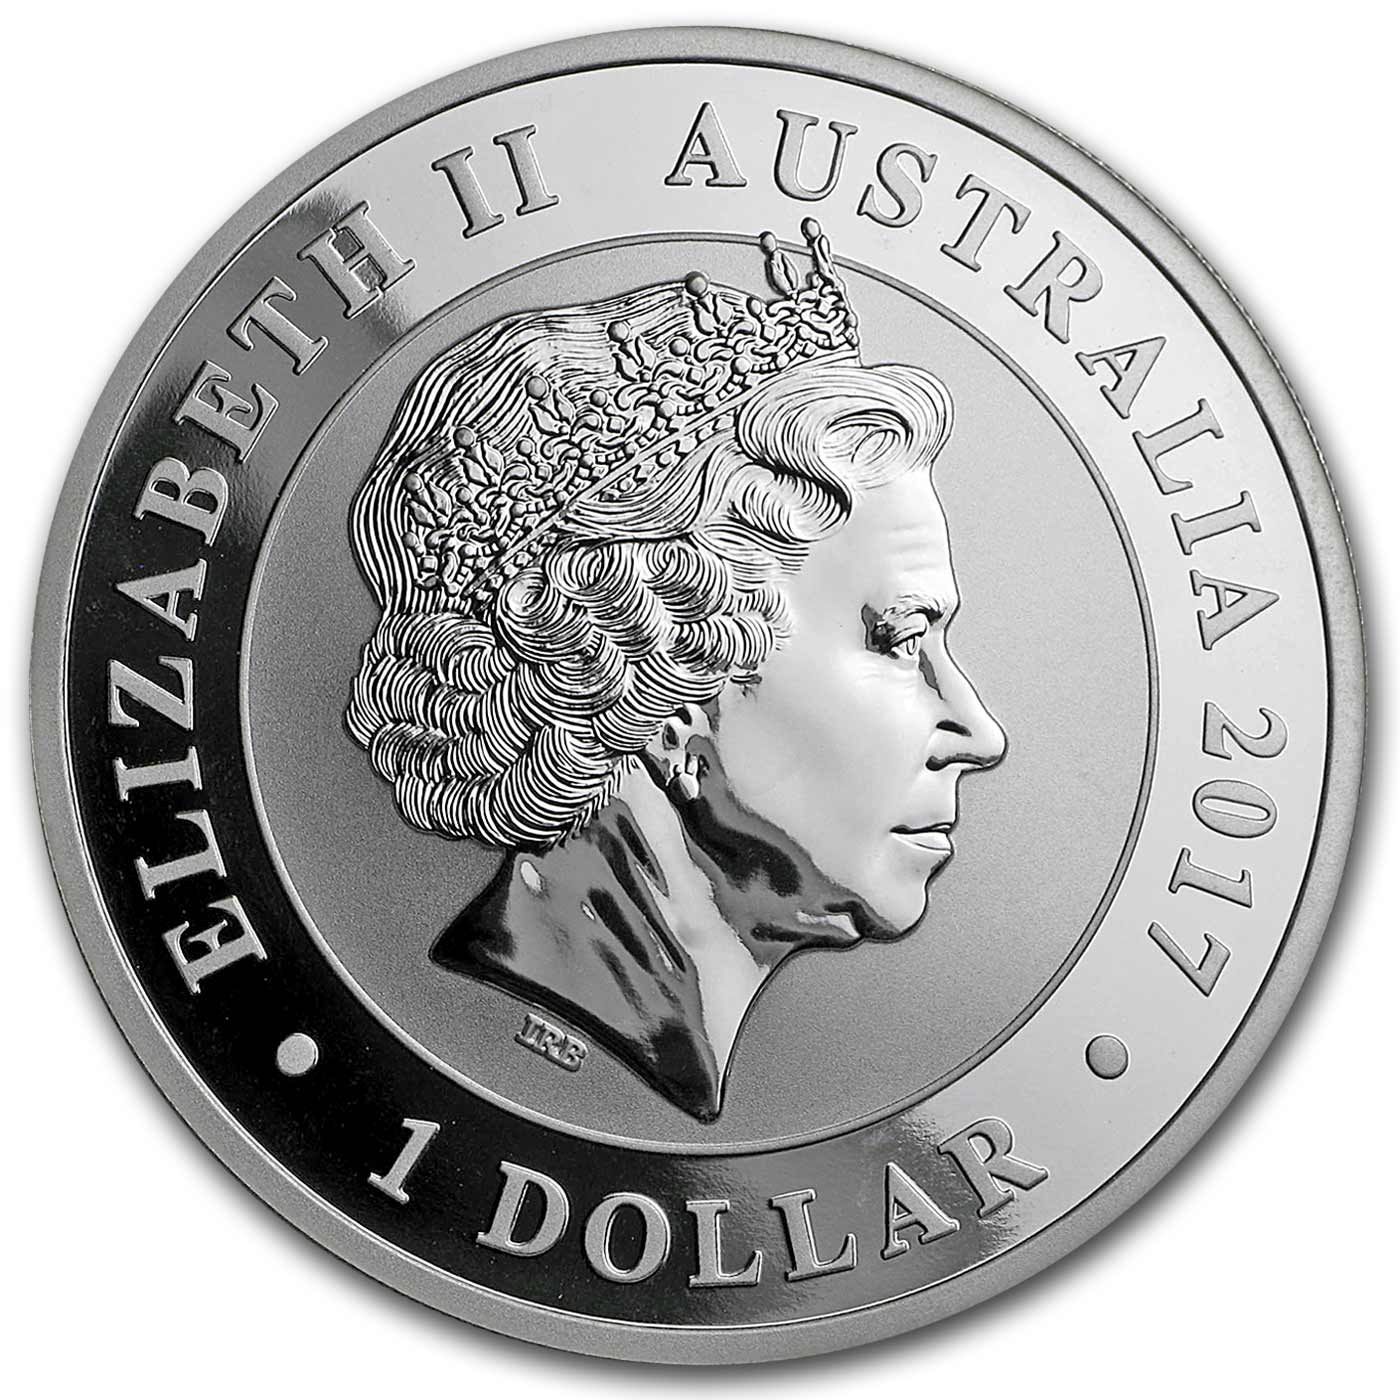 Perth Mint surprises with a new oneounce silver bullion coin series, the Silver Swan AgAuNEWS